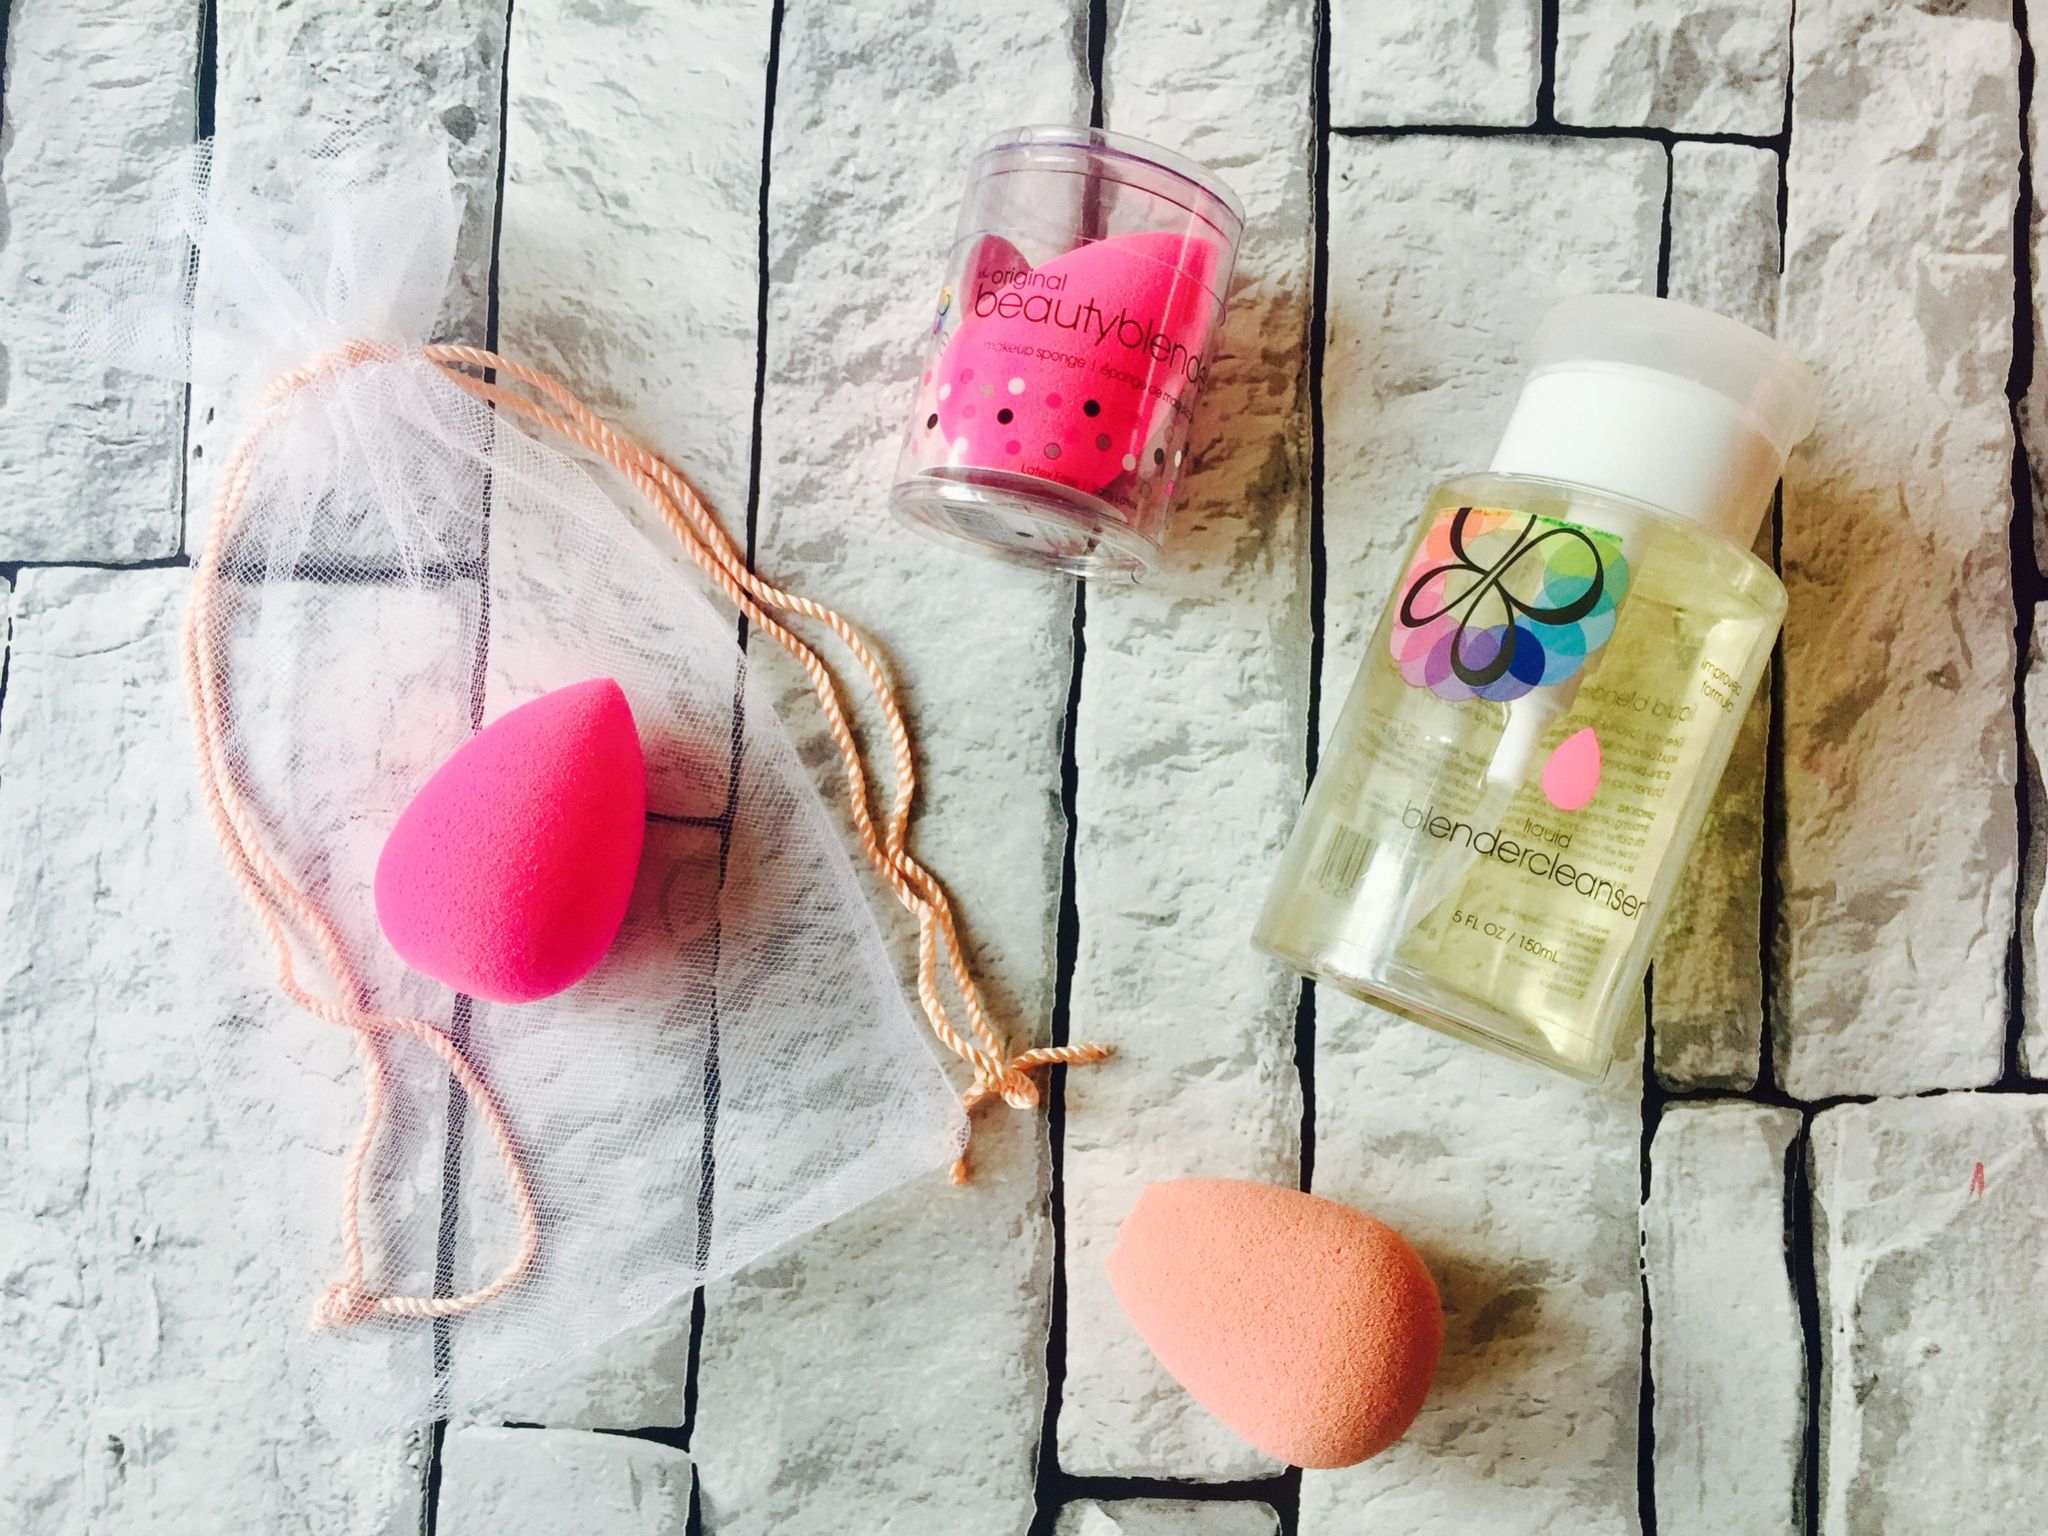 How to clean your beauty blender